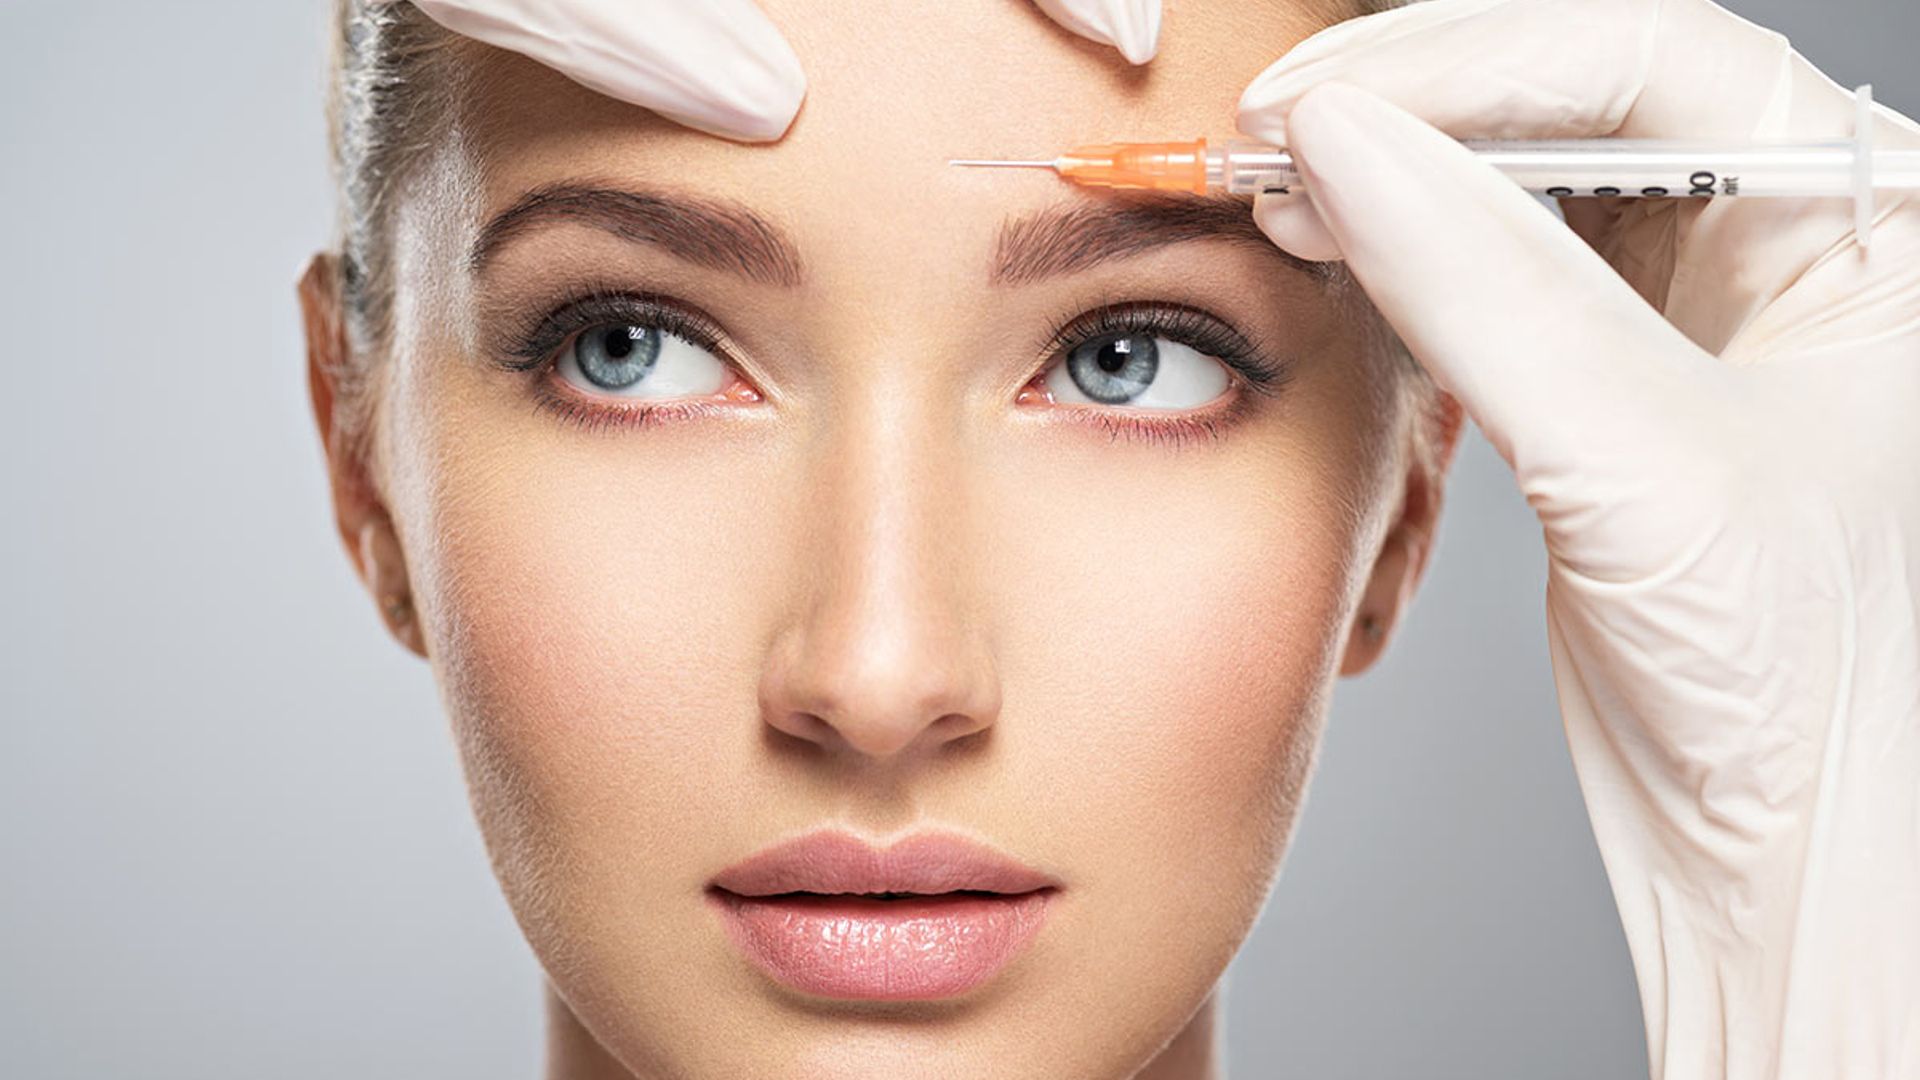 7 Botox questions a cosmetic doctor always gets asked